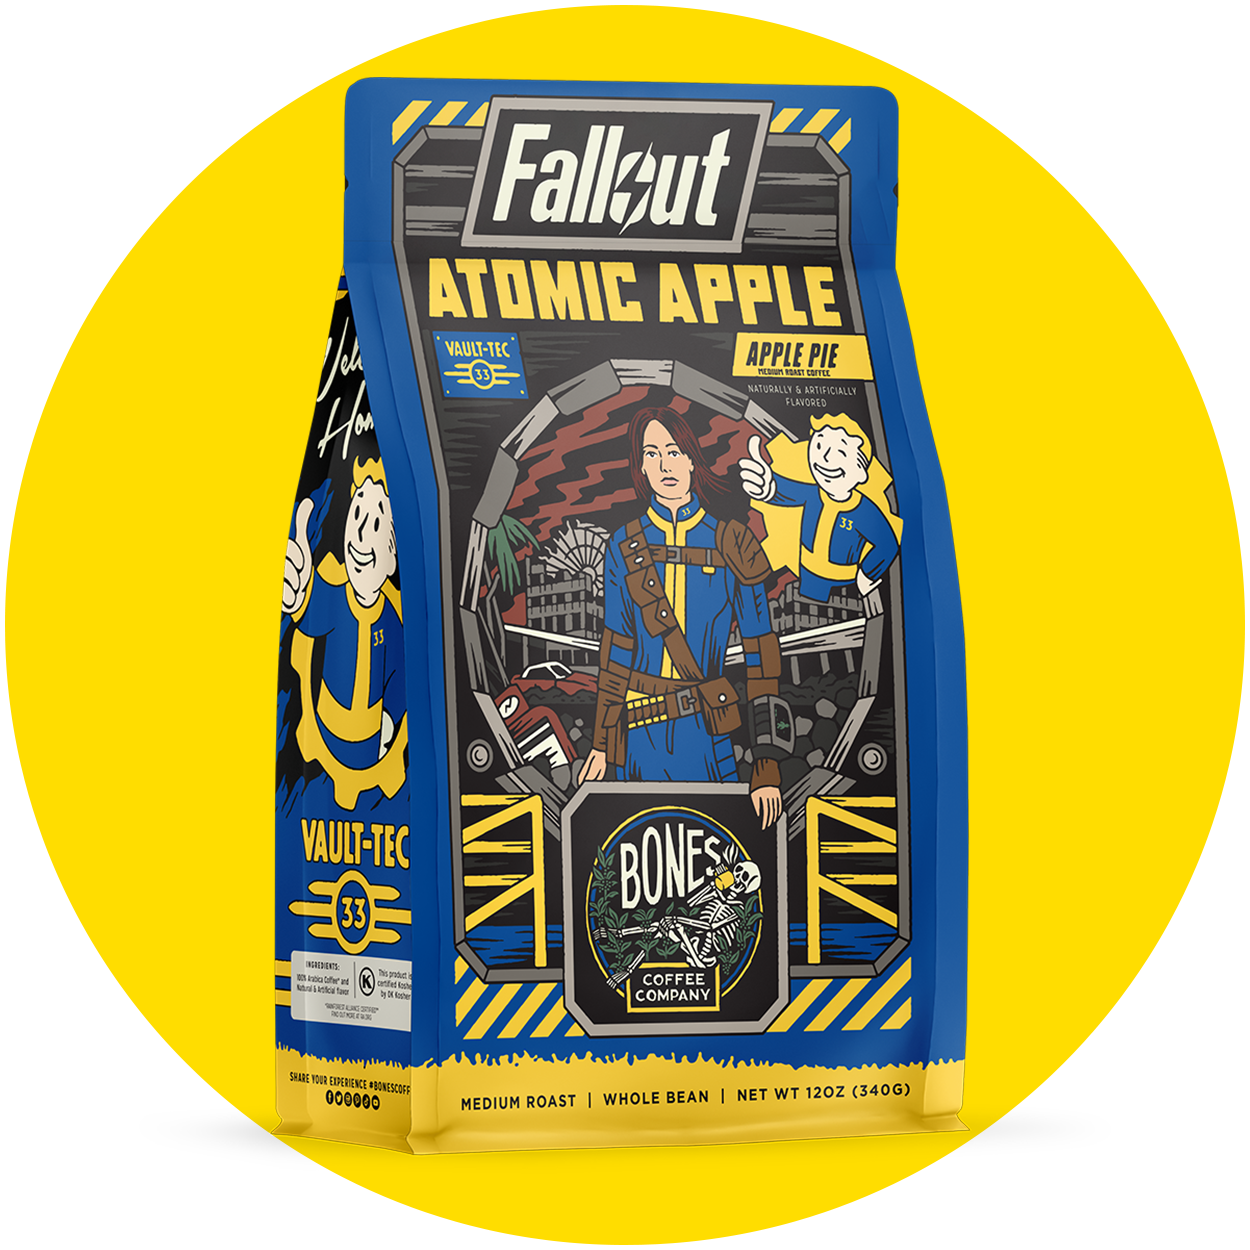 A 12 ounce bag of flavored coffee inspired by Fallout named Atomic Apple. Its flavor is apple pie. On the art is Lucy from the Fallout show. A yellow circle is behind the 12 ounce bag.